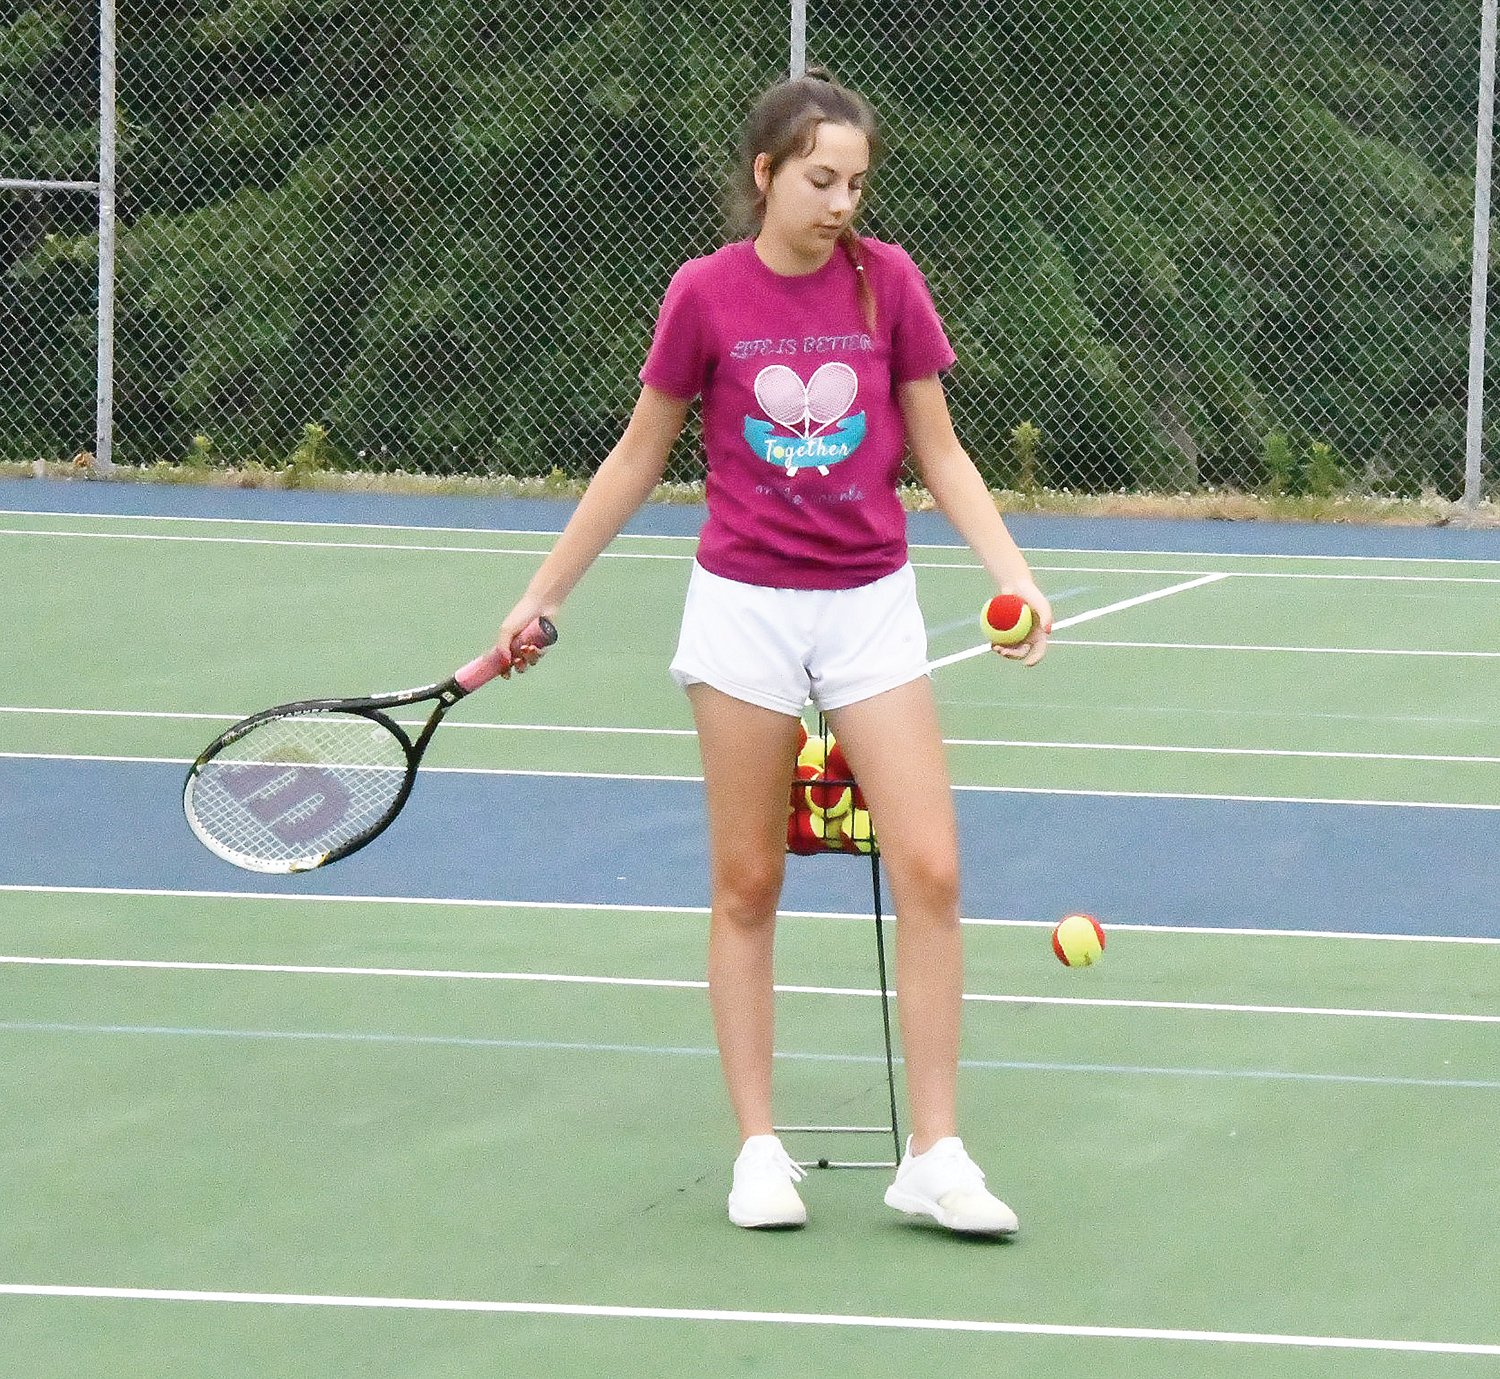 Moberly High School girls’ tennis player Hallie Kroner is serving as the instructor for this Moberly Parks and Recreation Department program for the first time this summer.